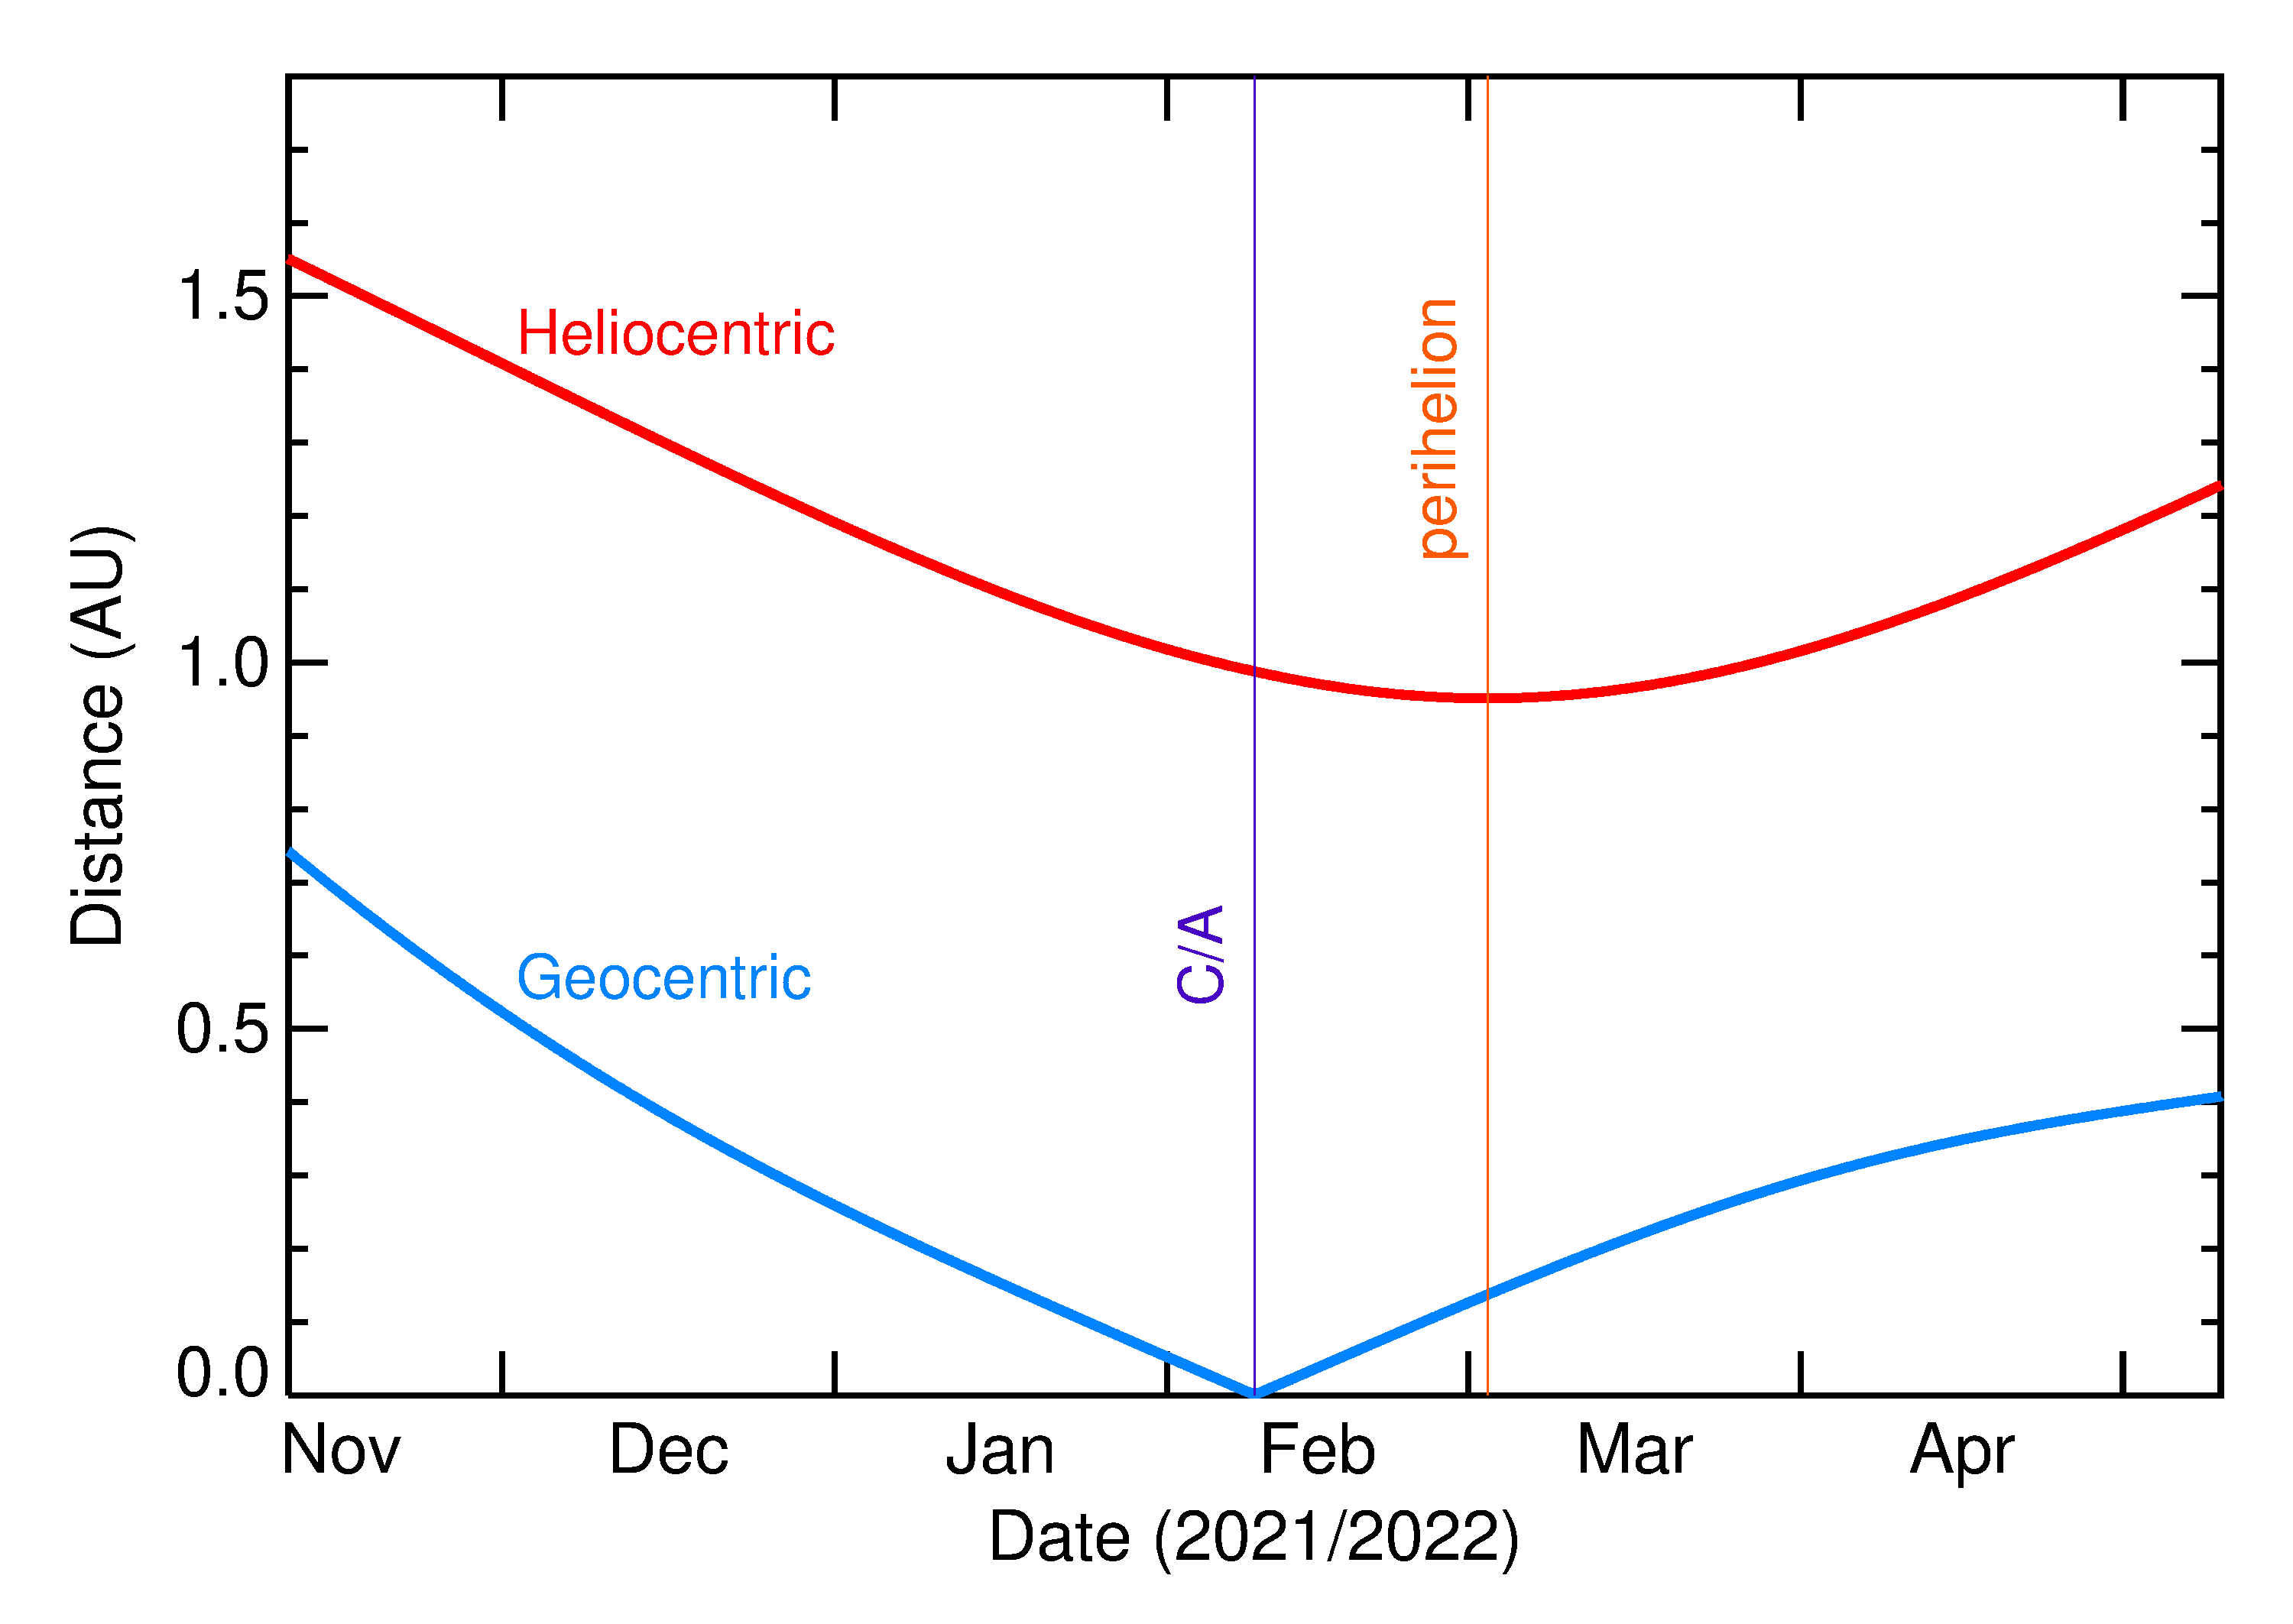 Heliocentric and Geocentric Distances of 2022 CD3 in the months around closest approach